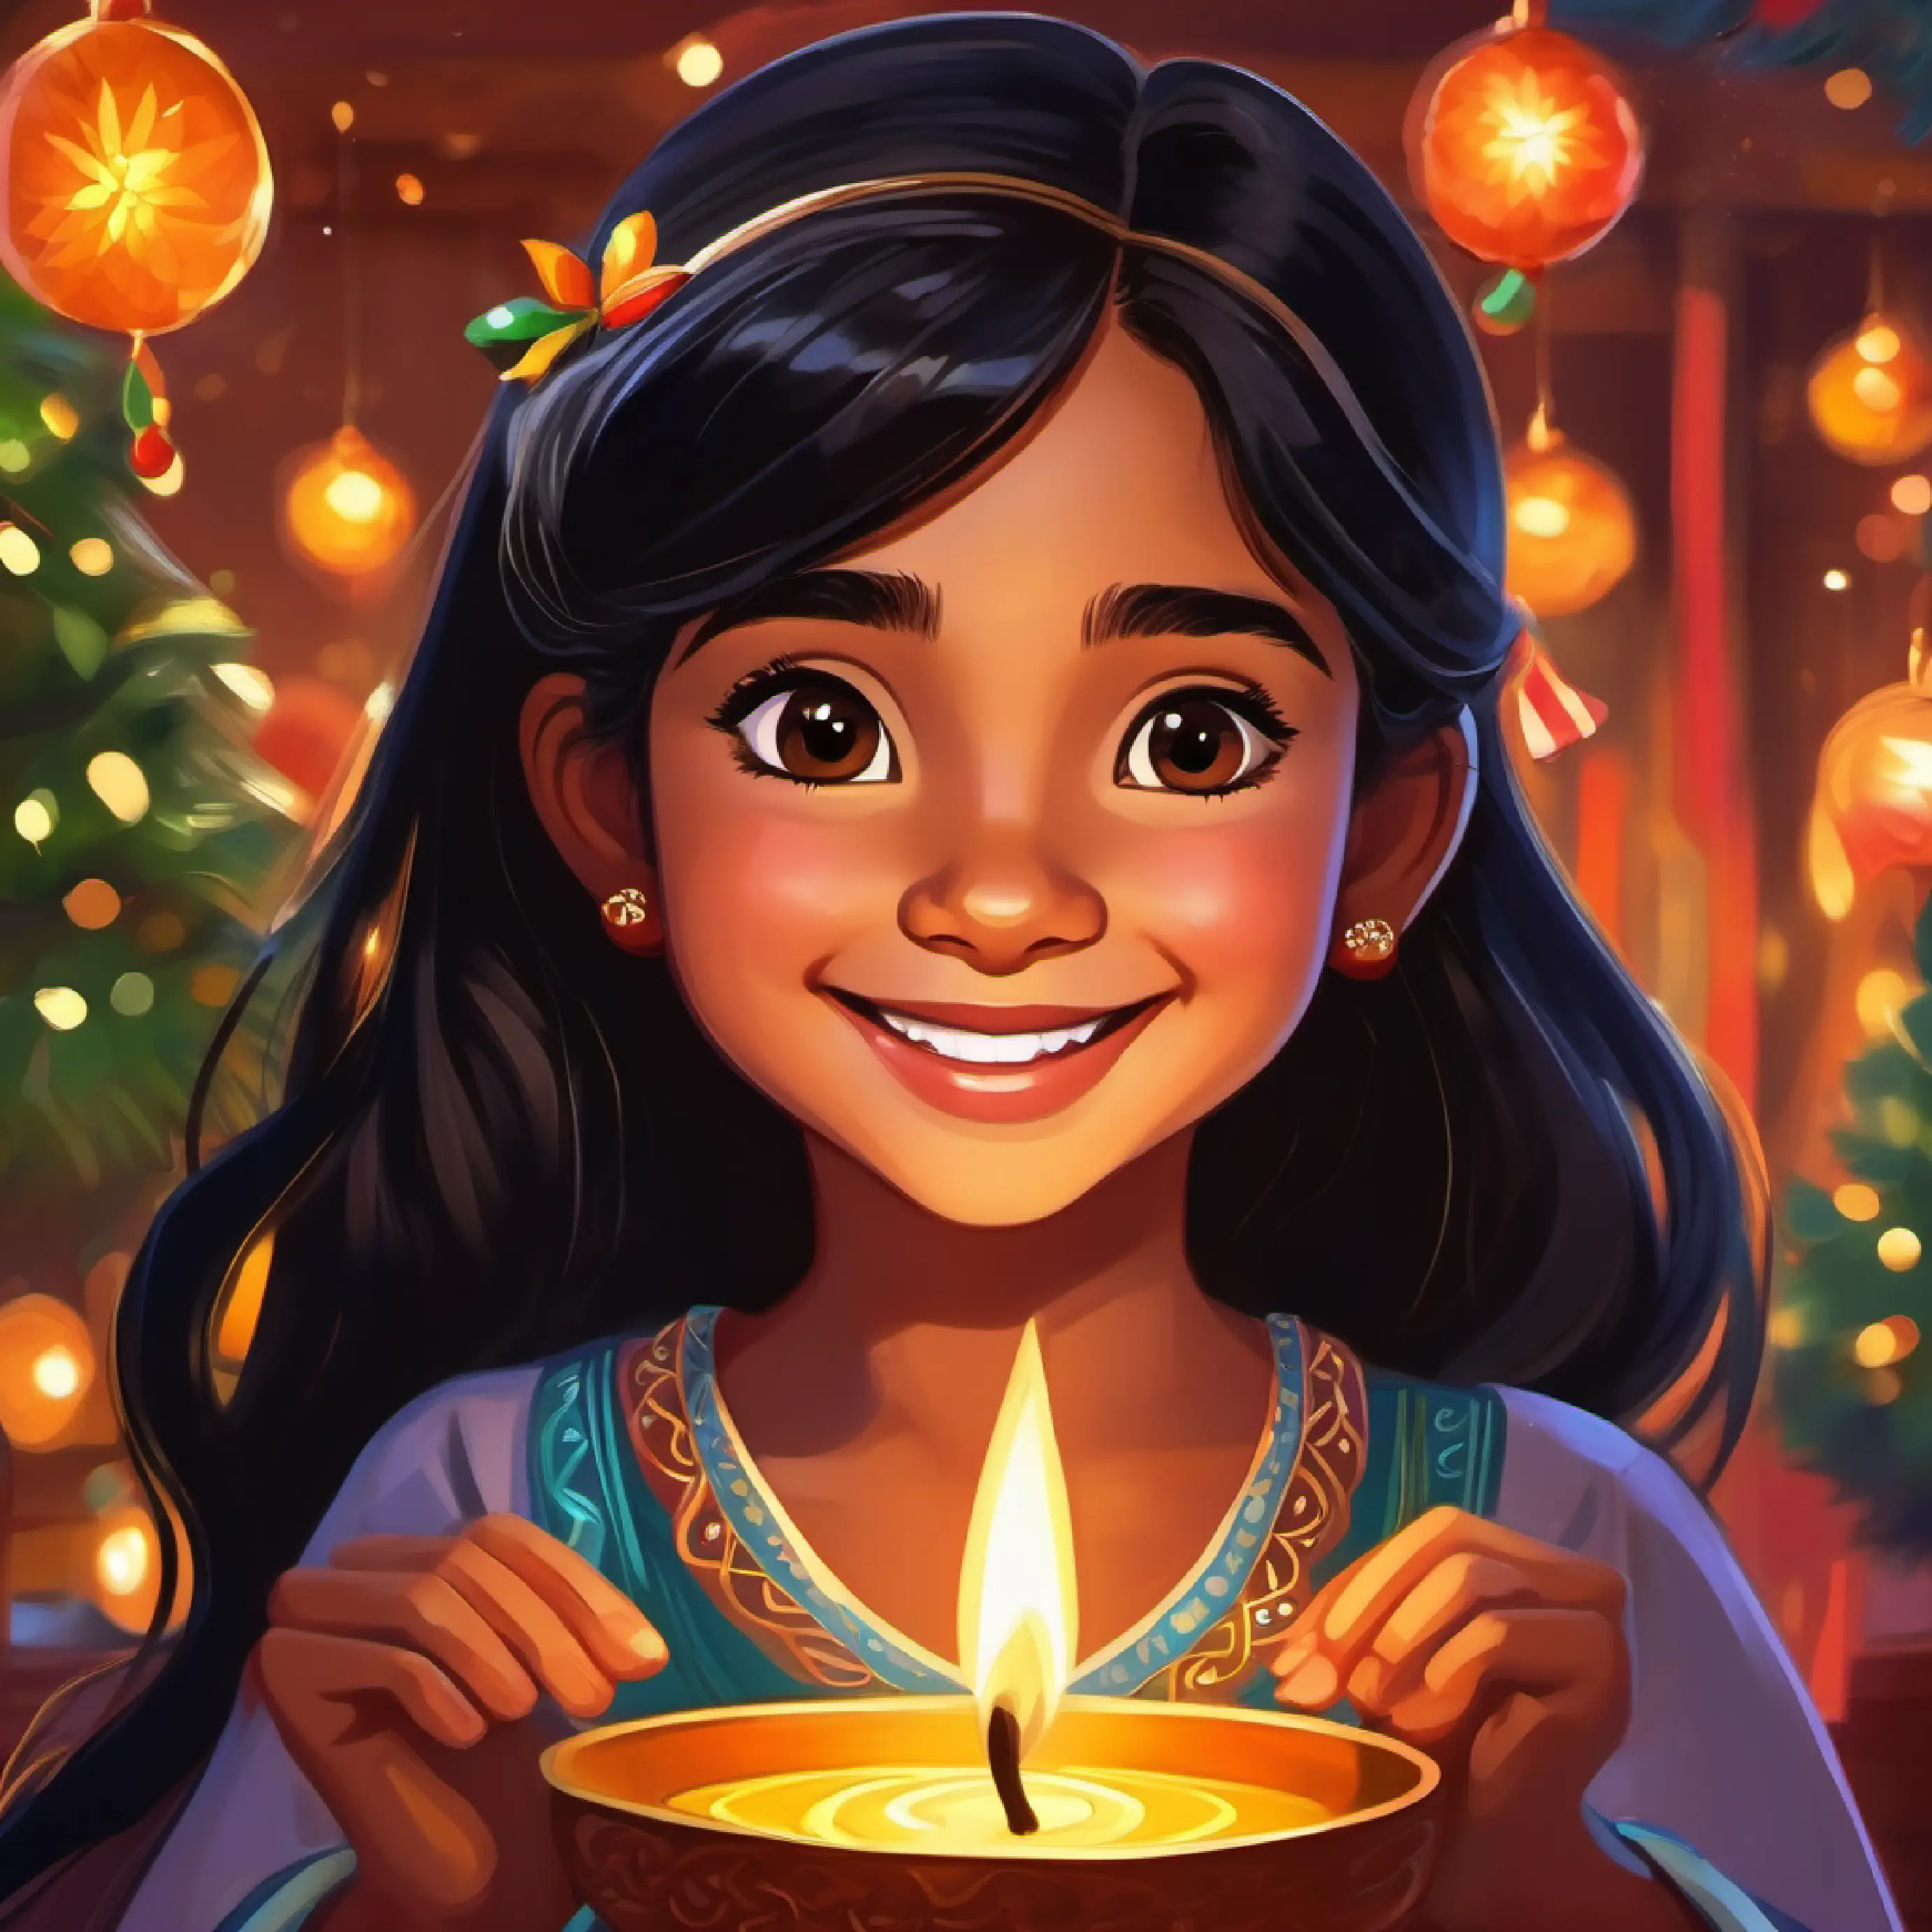 Young girl, long black hair, brown eyes, vibrant smile reflects on joy of giving during Diwali.